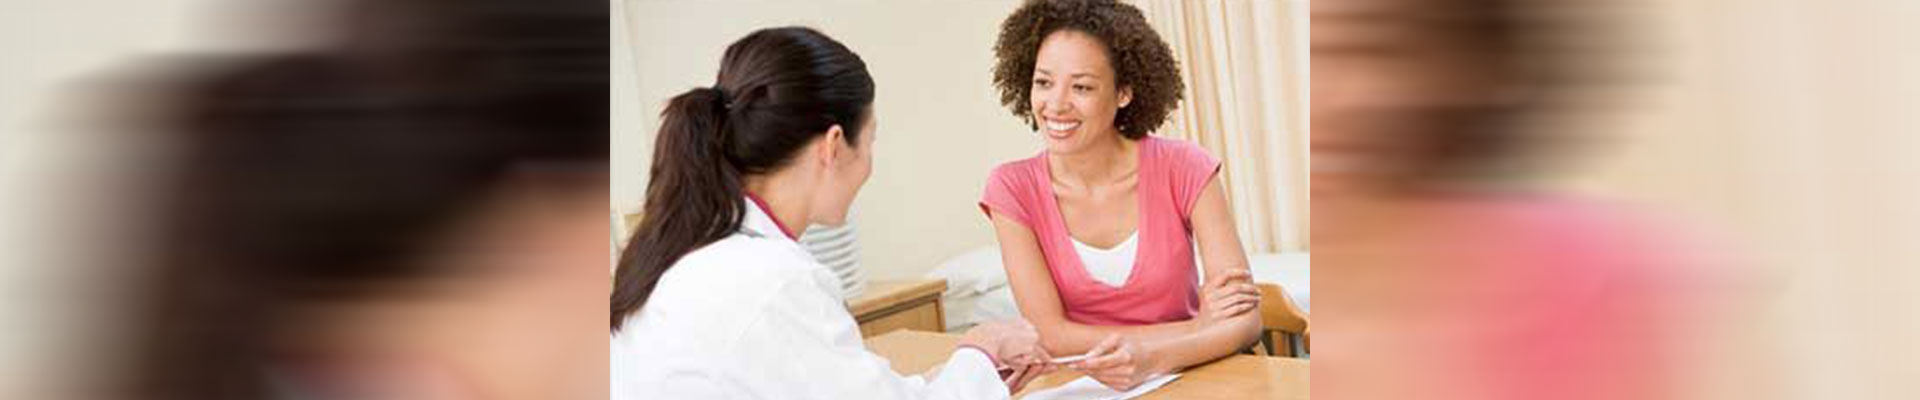 Why have a well-woman check-up?